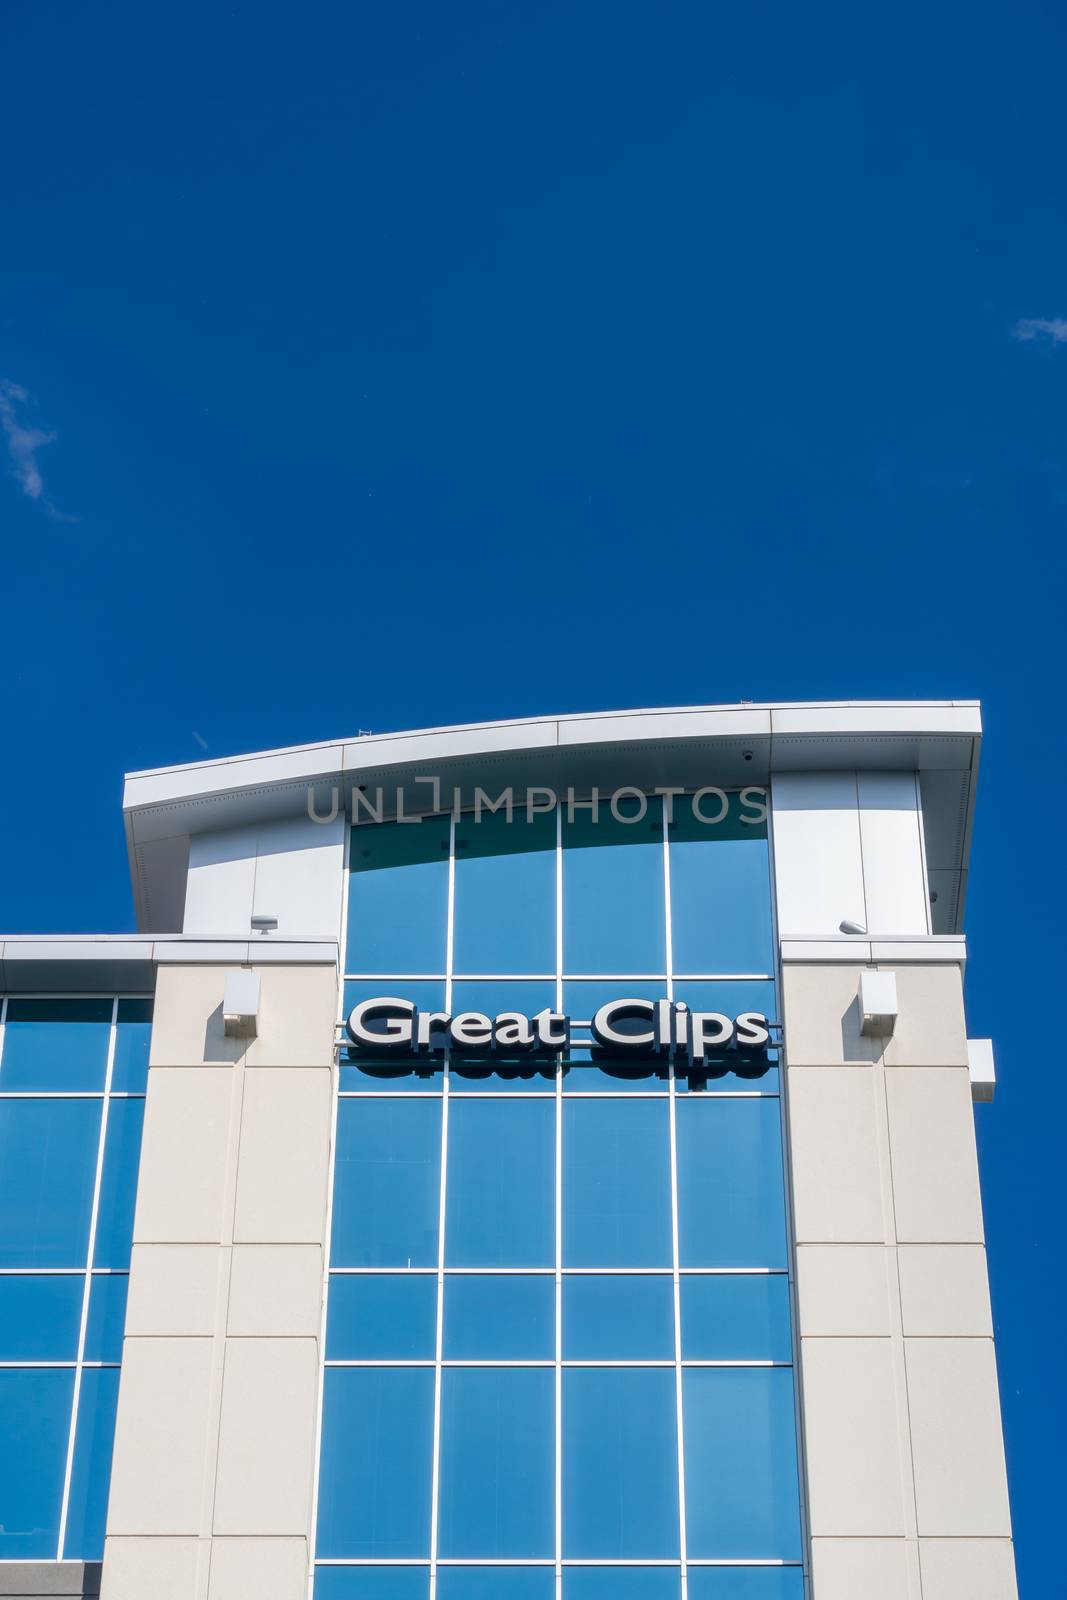 BLOOMINGTON, MN/USA - MAY 29, 2016: Great Clips corporate office headquarters. Great Clips is a hair salon franchise with over 3,700 locations across the United States and Canada.